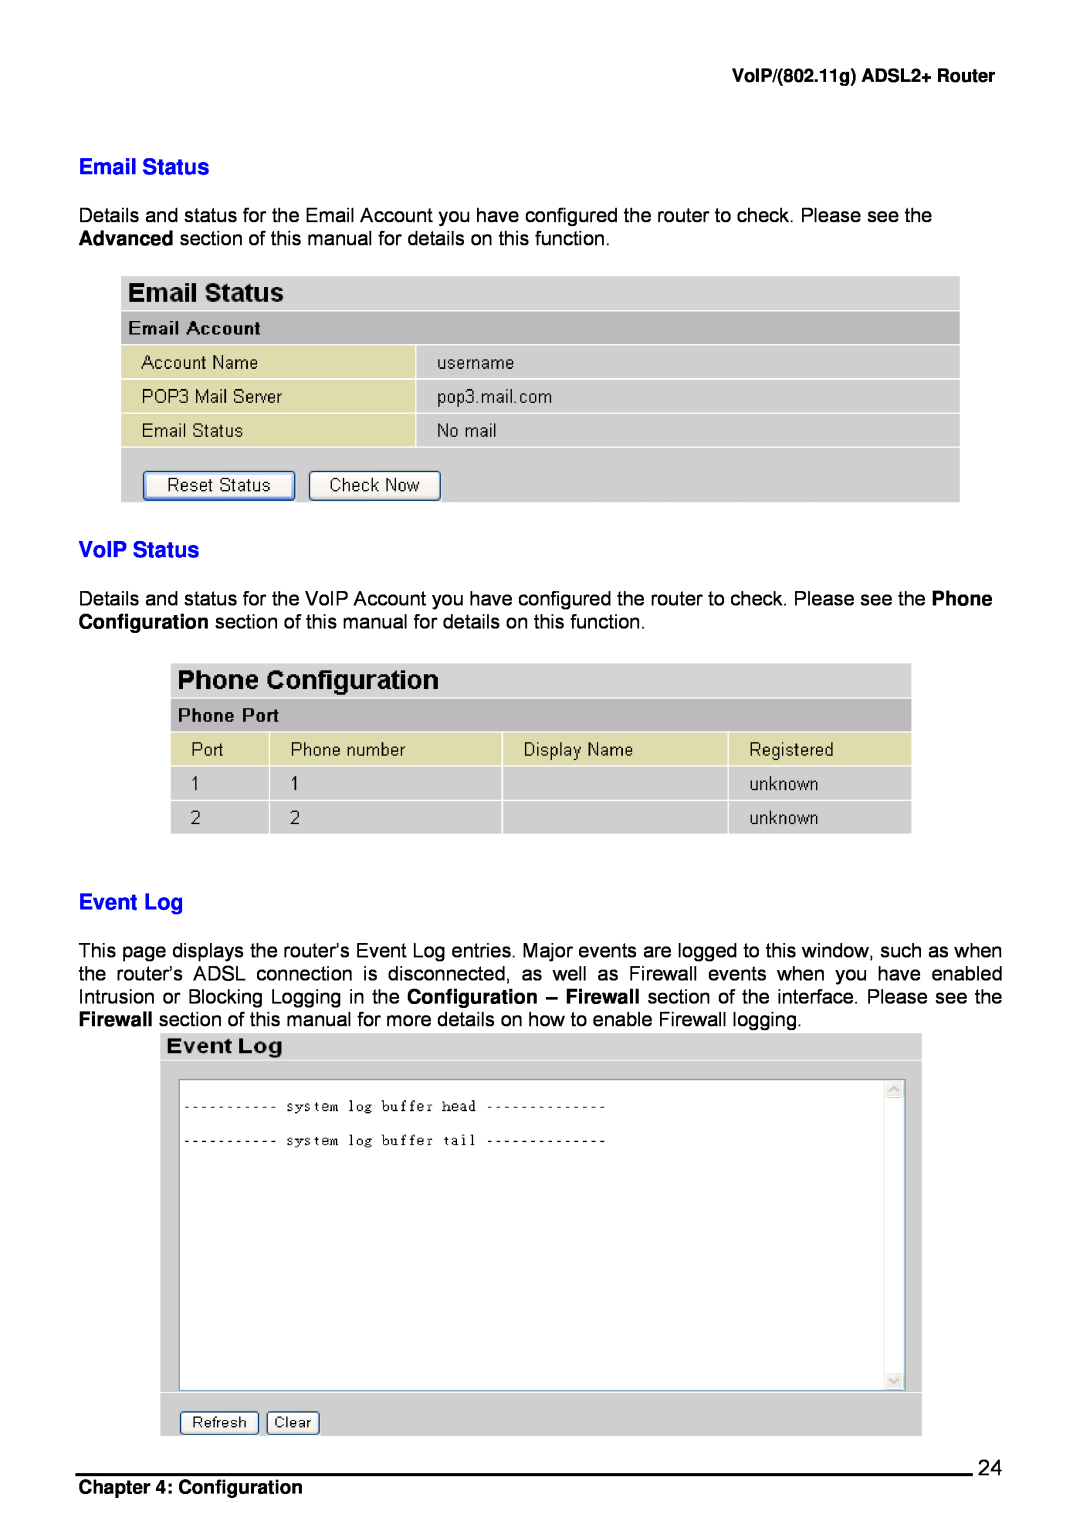 Billion Electric Company 7402VL user manual Email Status, VoIP Status, Event Log 